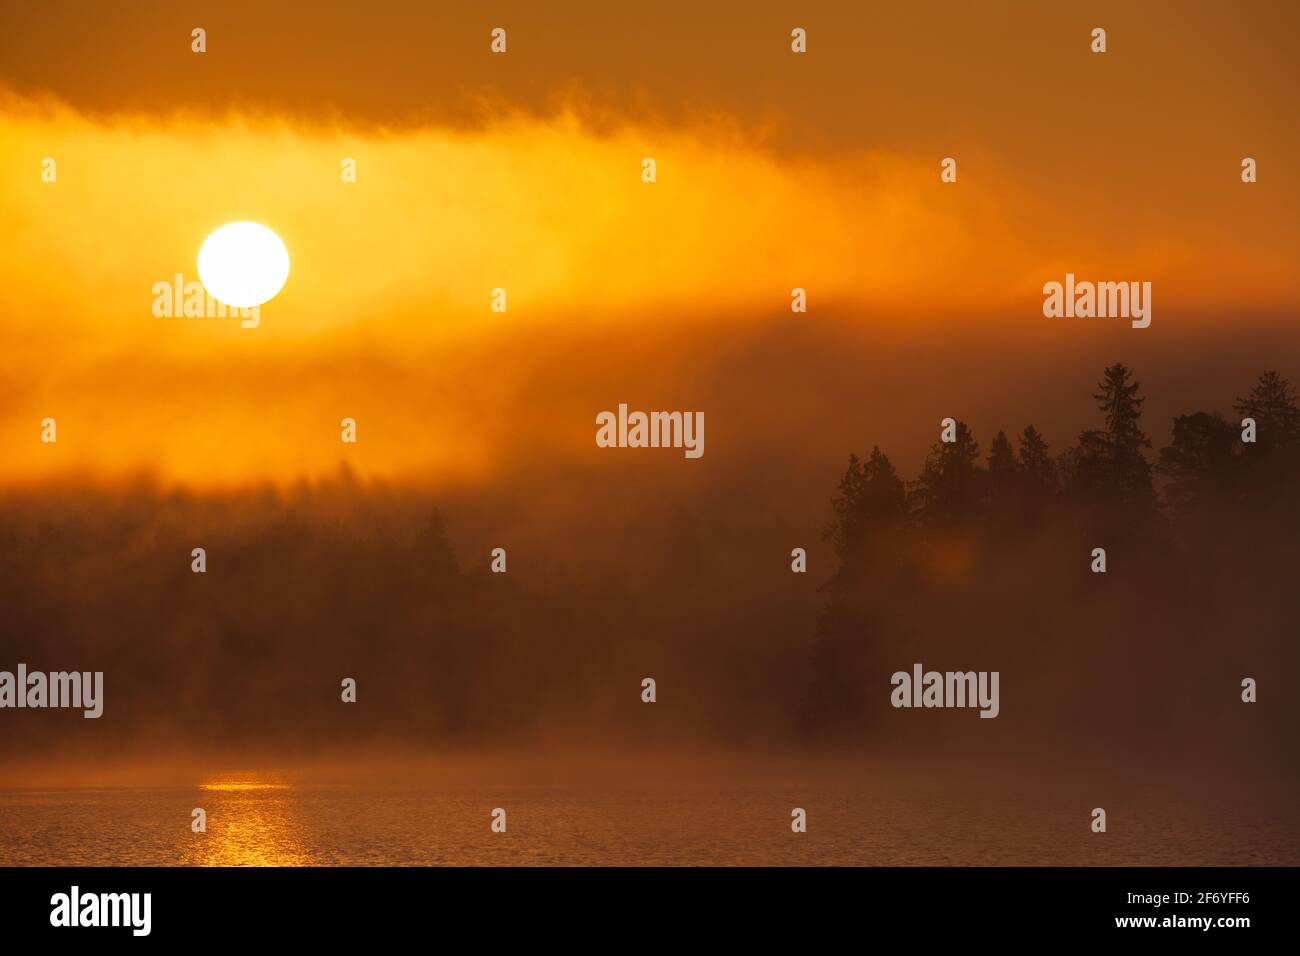 Sun rising above forest and misty lake, Sweden. Stock Photo